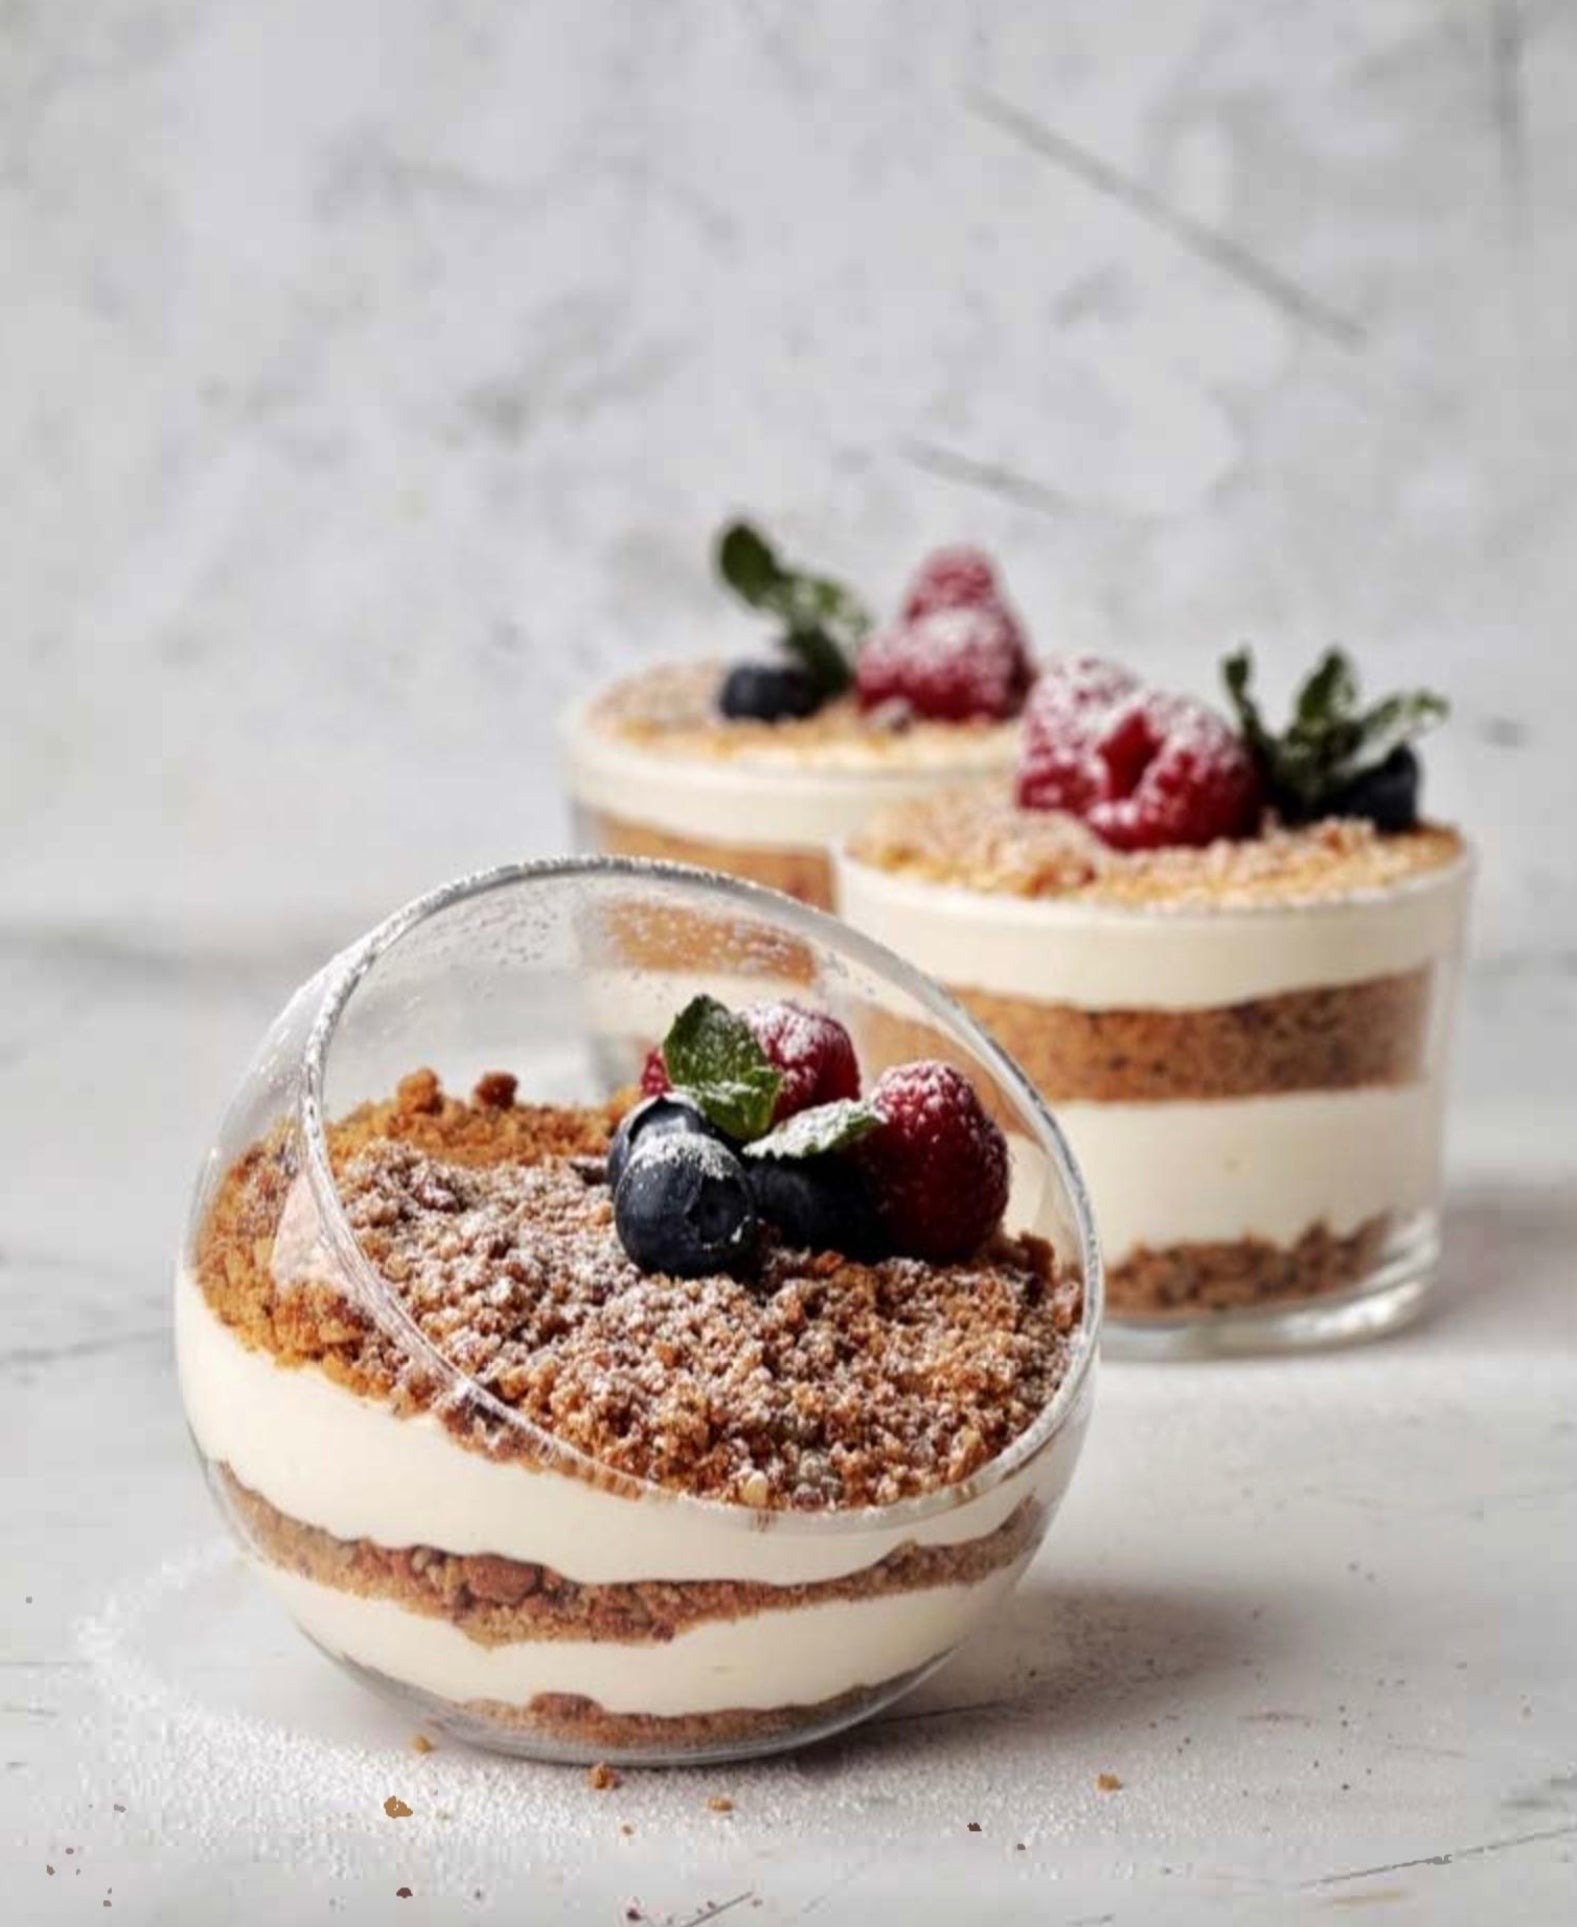 Low calorie/high protein honey cake in a cup